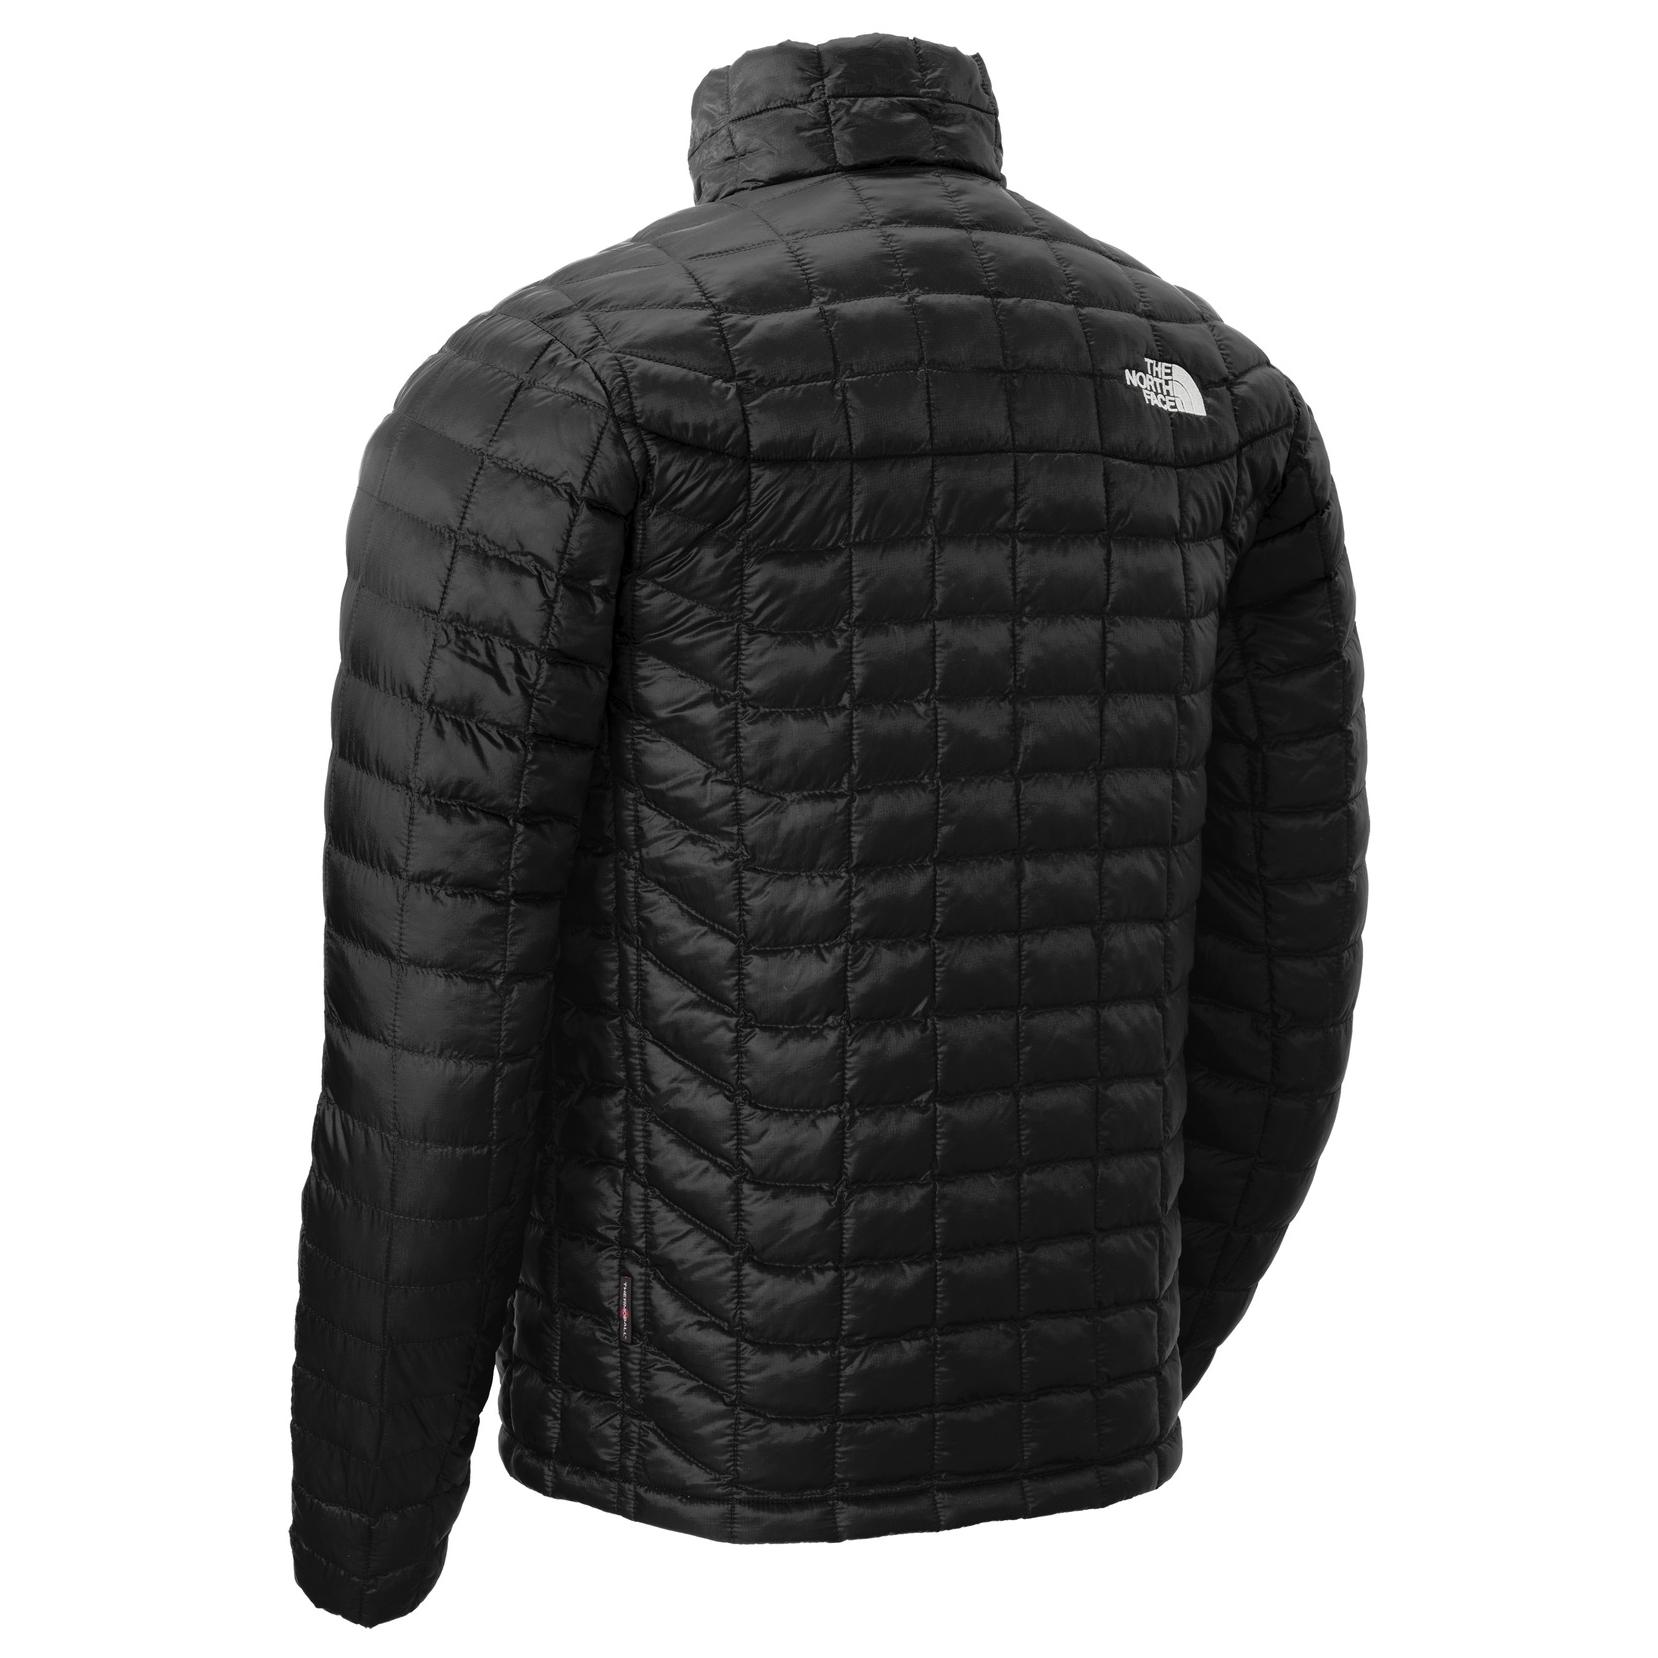 The North Face NF0A3LH2 ThermoBall Trekker Jacket - Black | Full Source